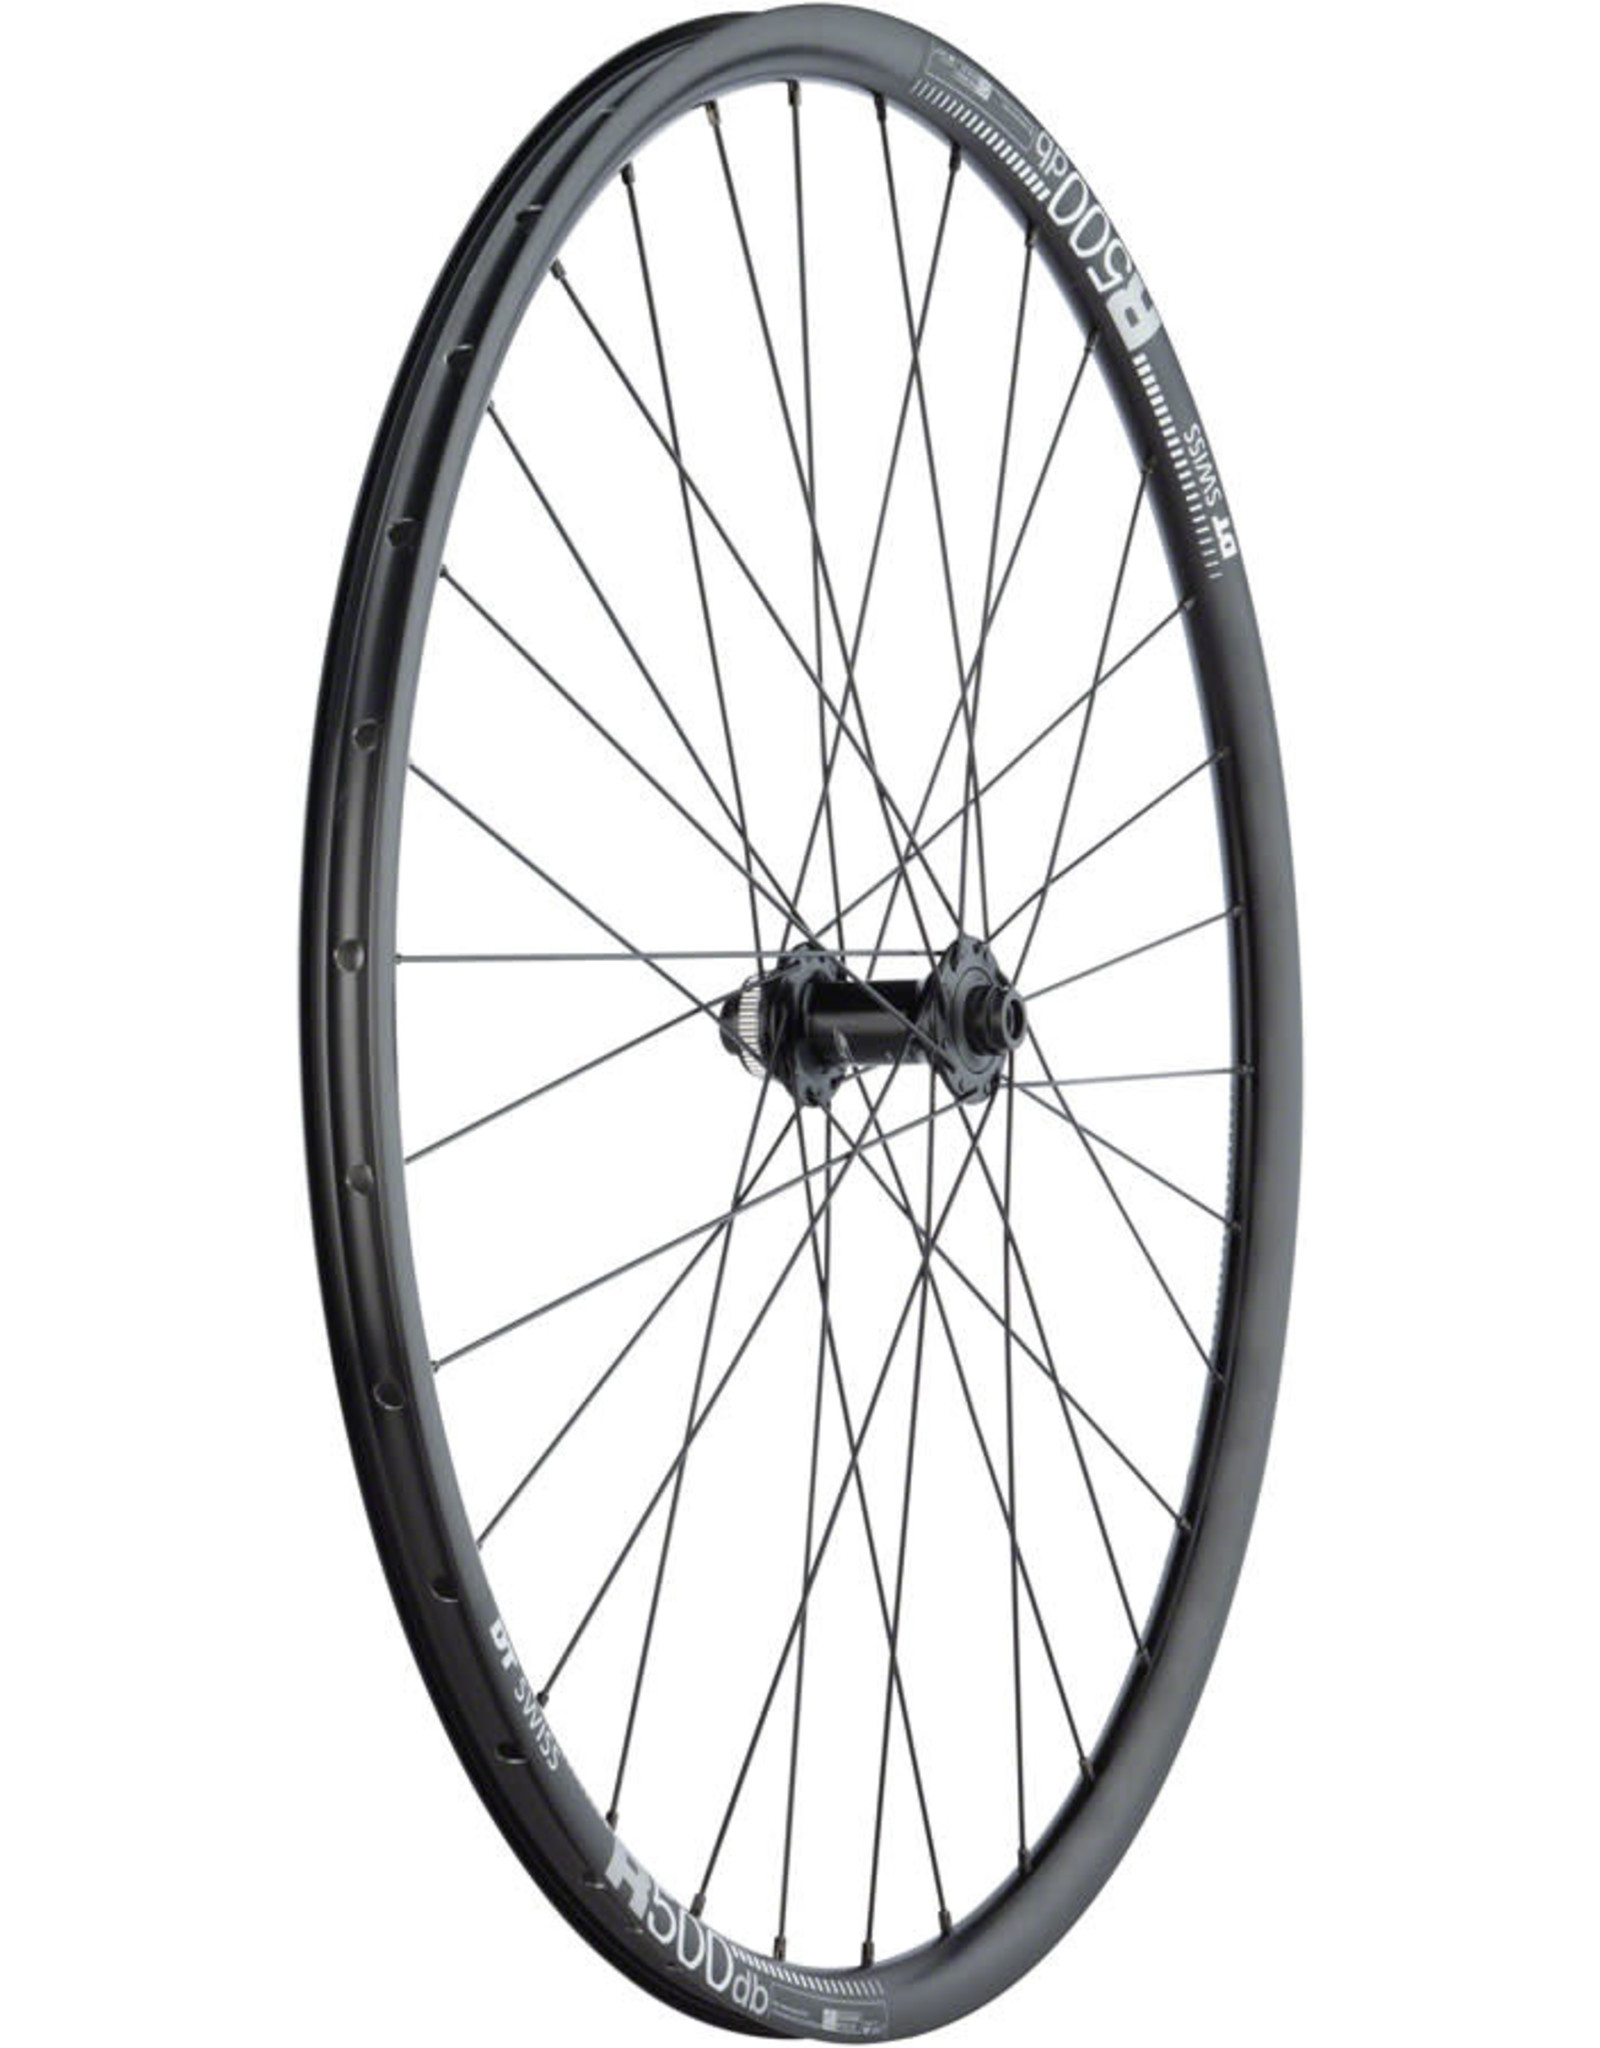 Quality Wheels Shimano RS505/DT Swiss R500 Disc - 700, 12 x 100mm, Center-Lock, Black, Front Wheel